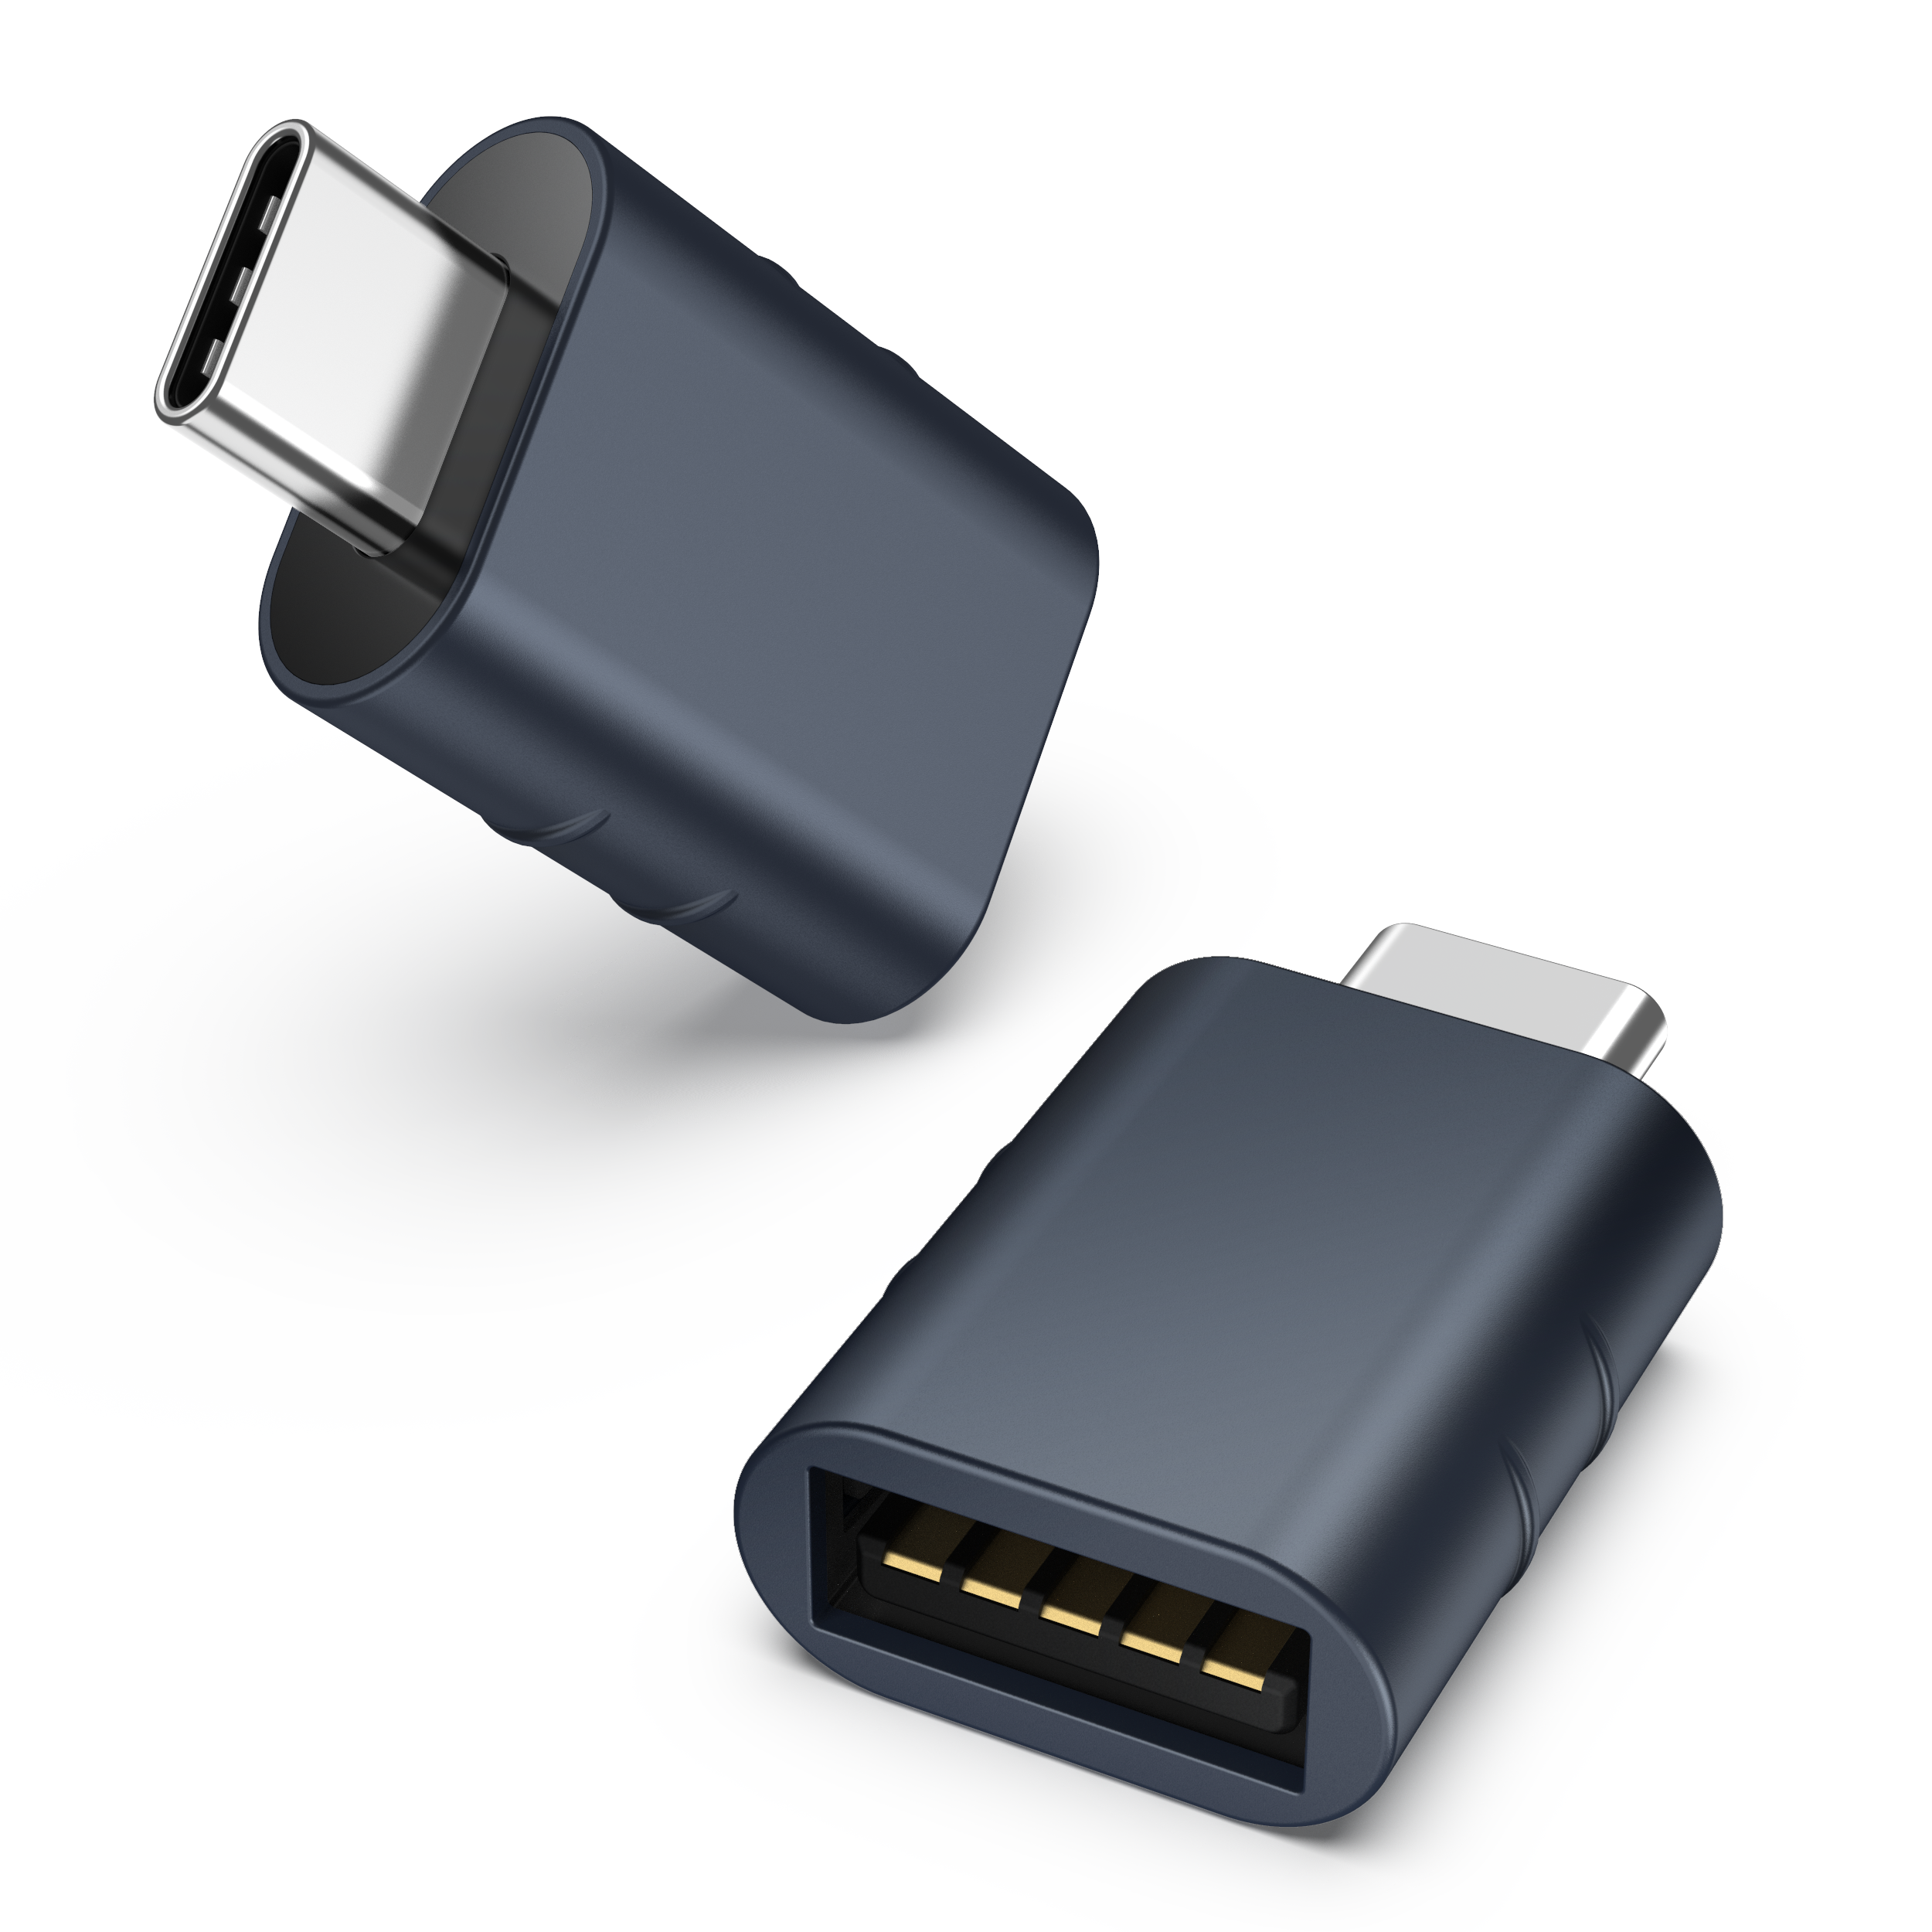 USB C USB Adapter Pack of 2 C Male to USB3 Female Adapter